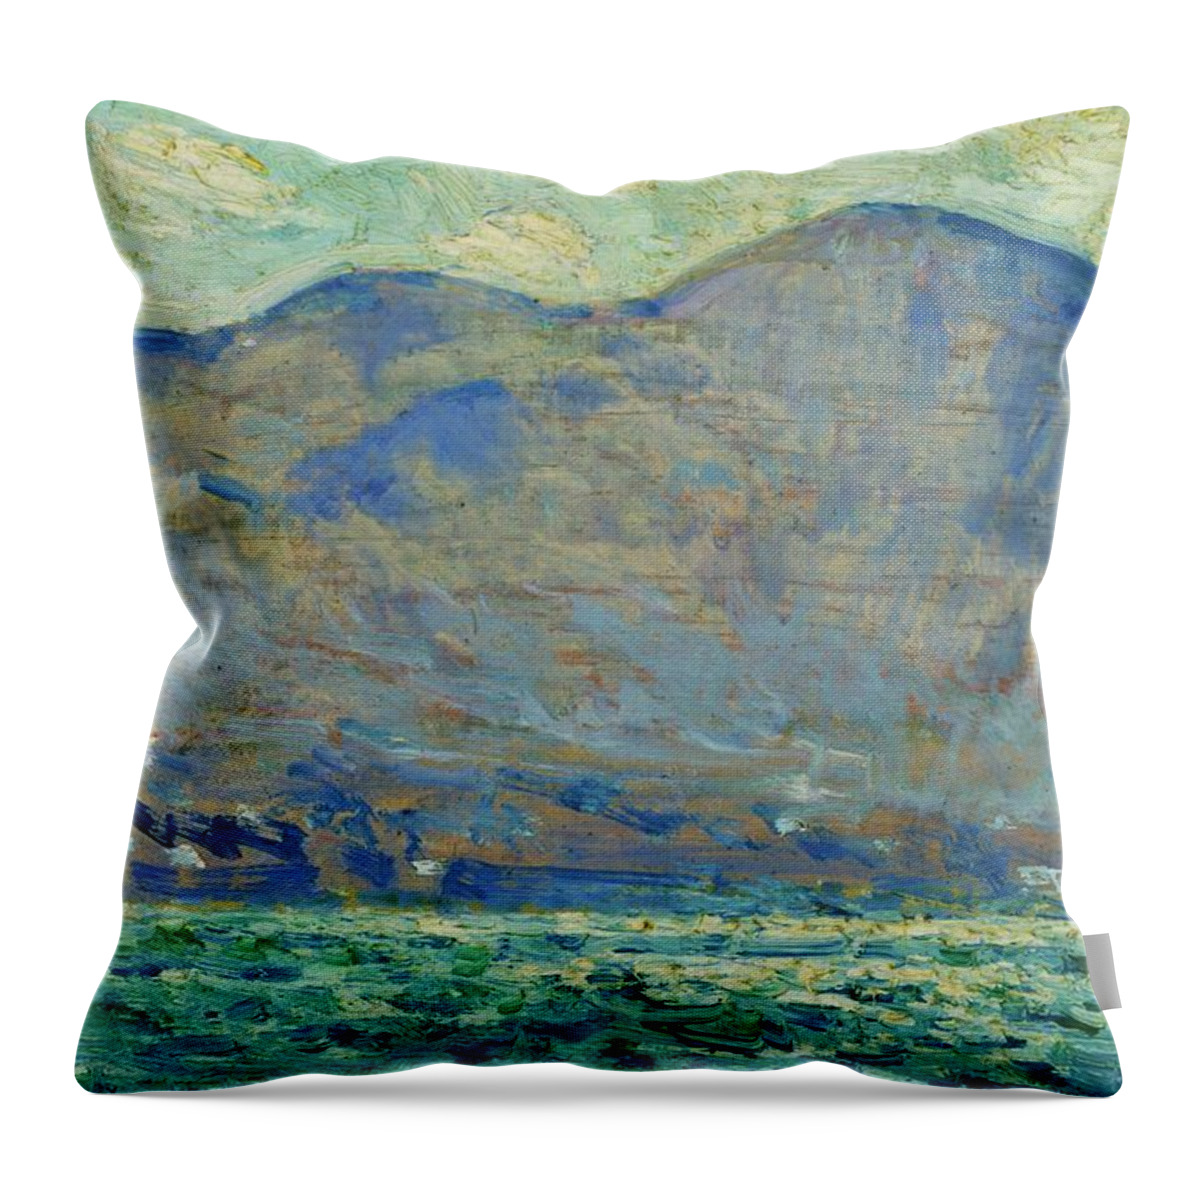 Impressionism Throw Pillow featuring the painting Mt. Beacon At Newburgh by Childe Hassam